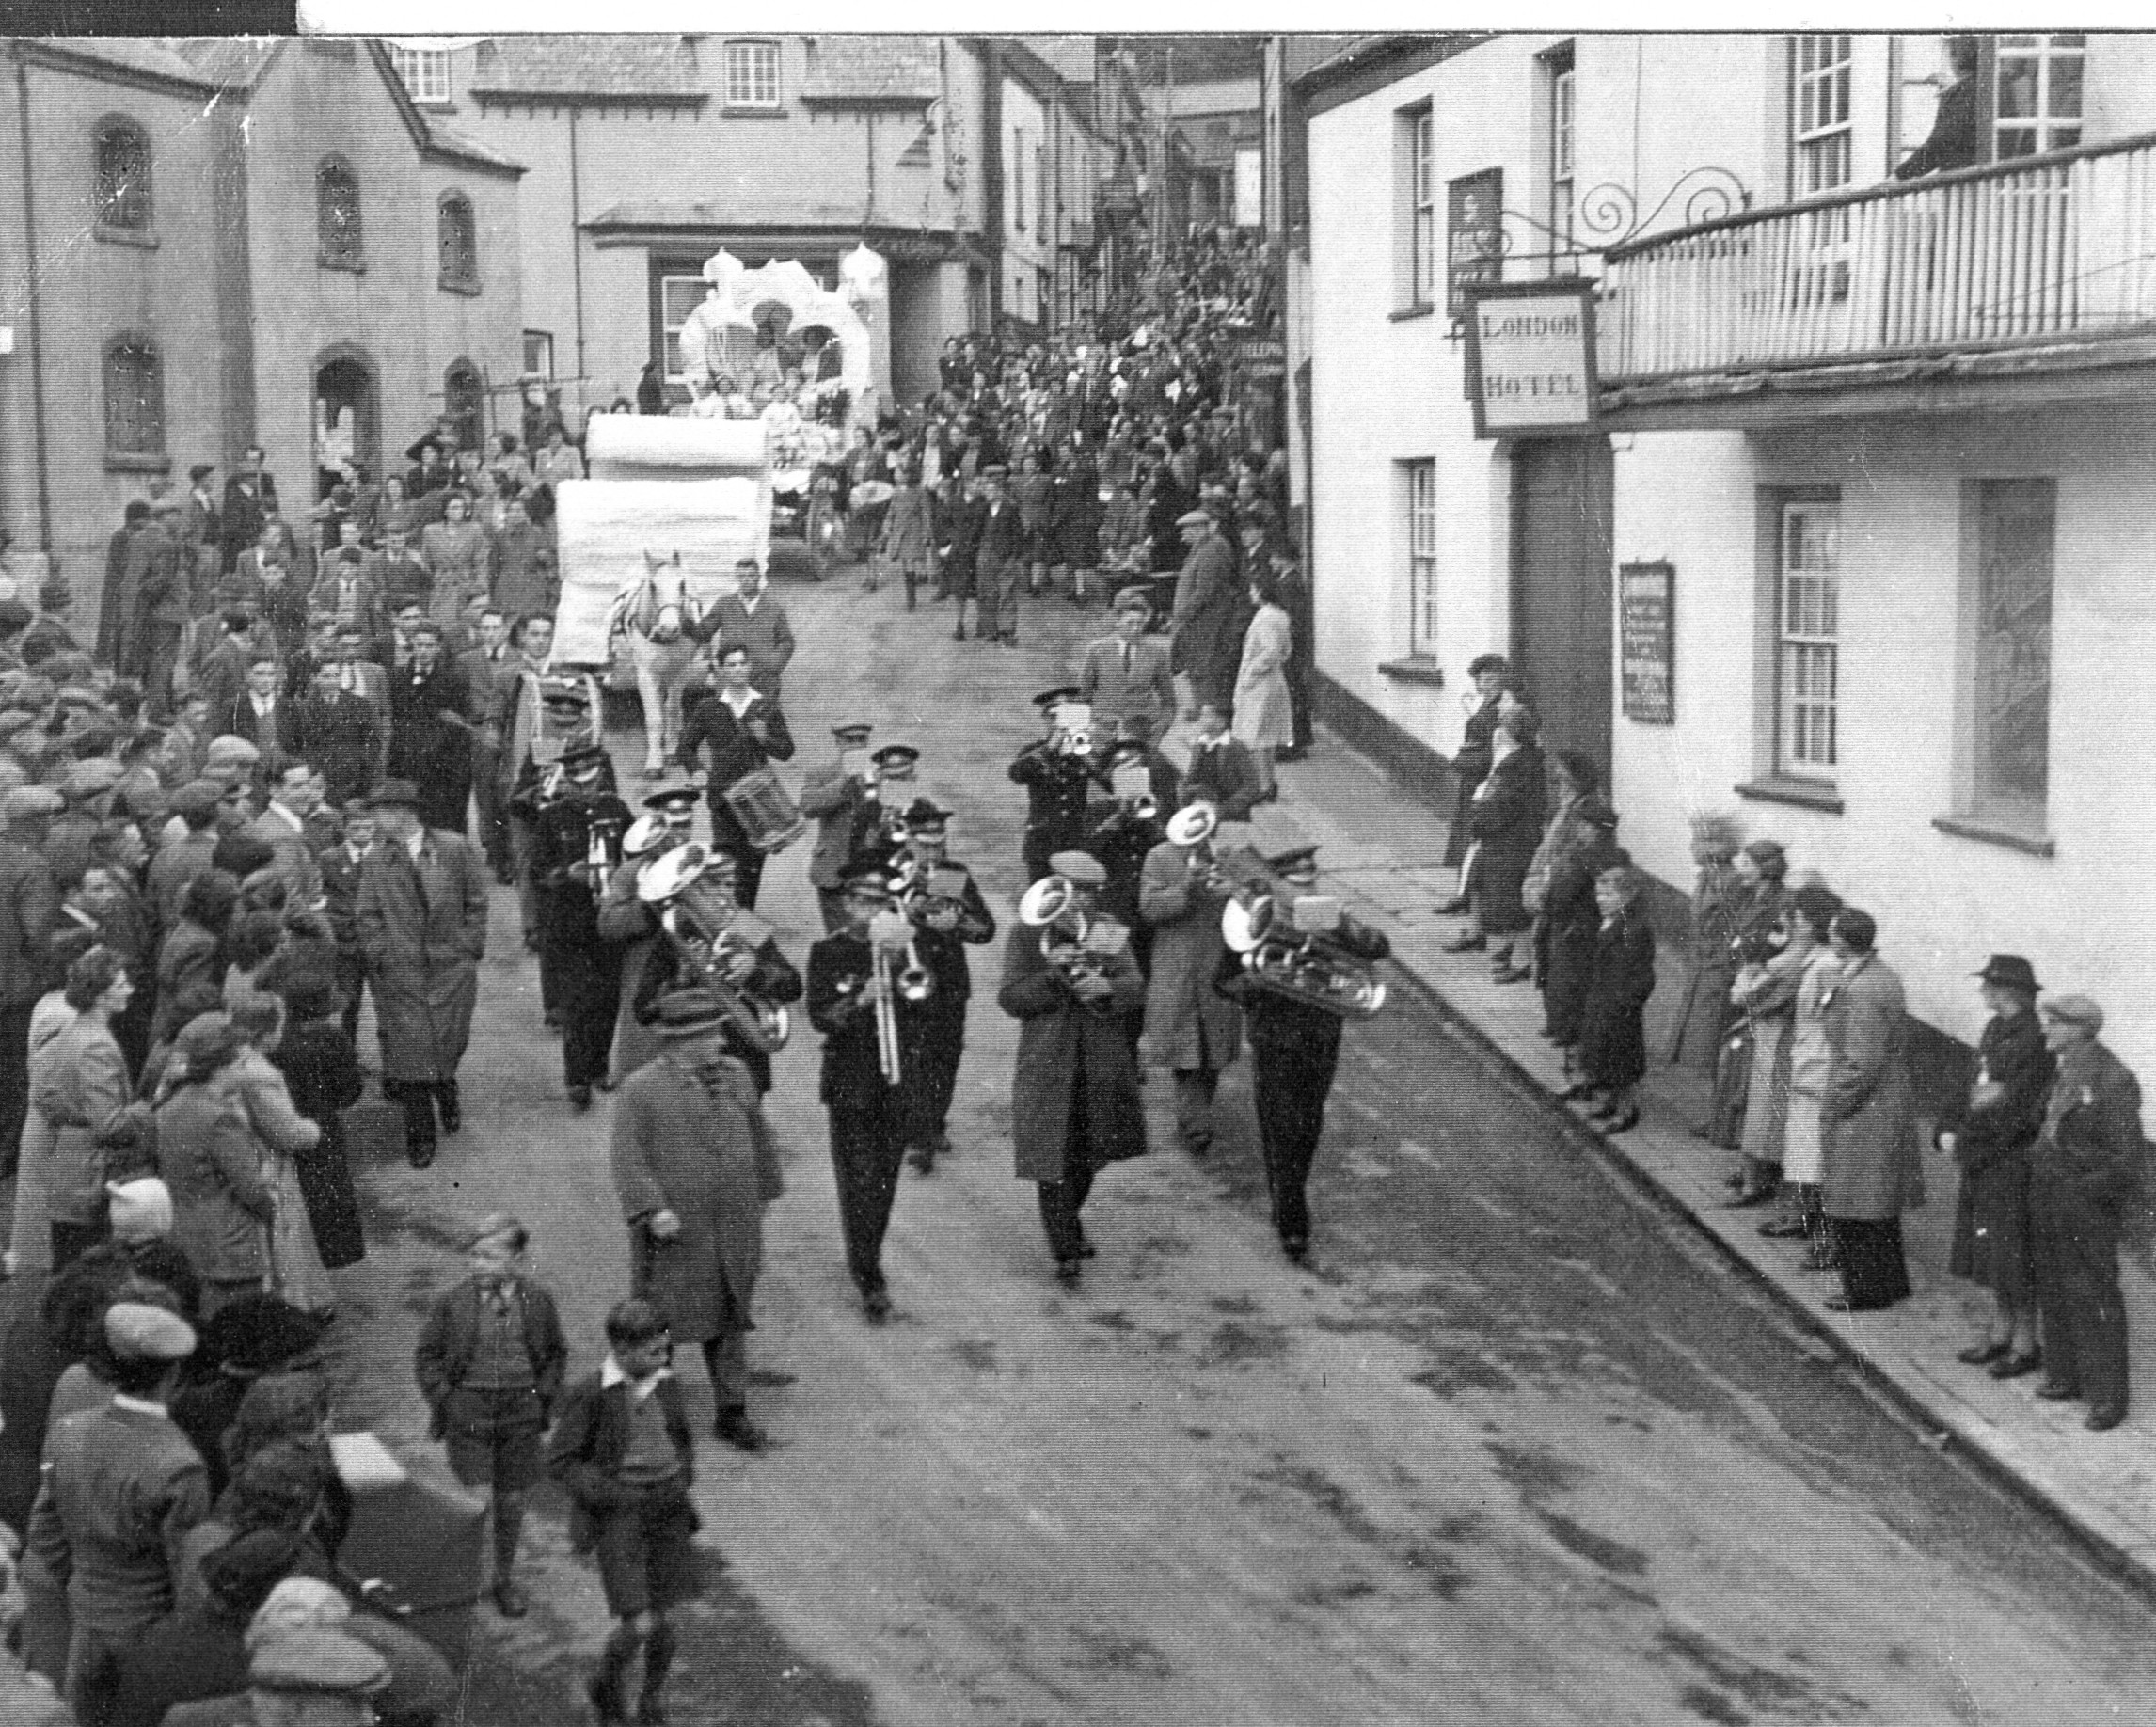 Hatherleigh Silver Band Carnival 1930's